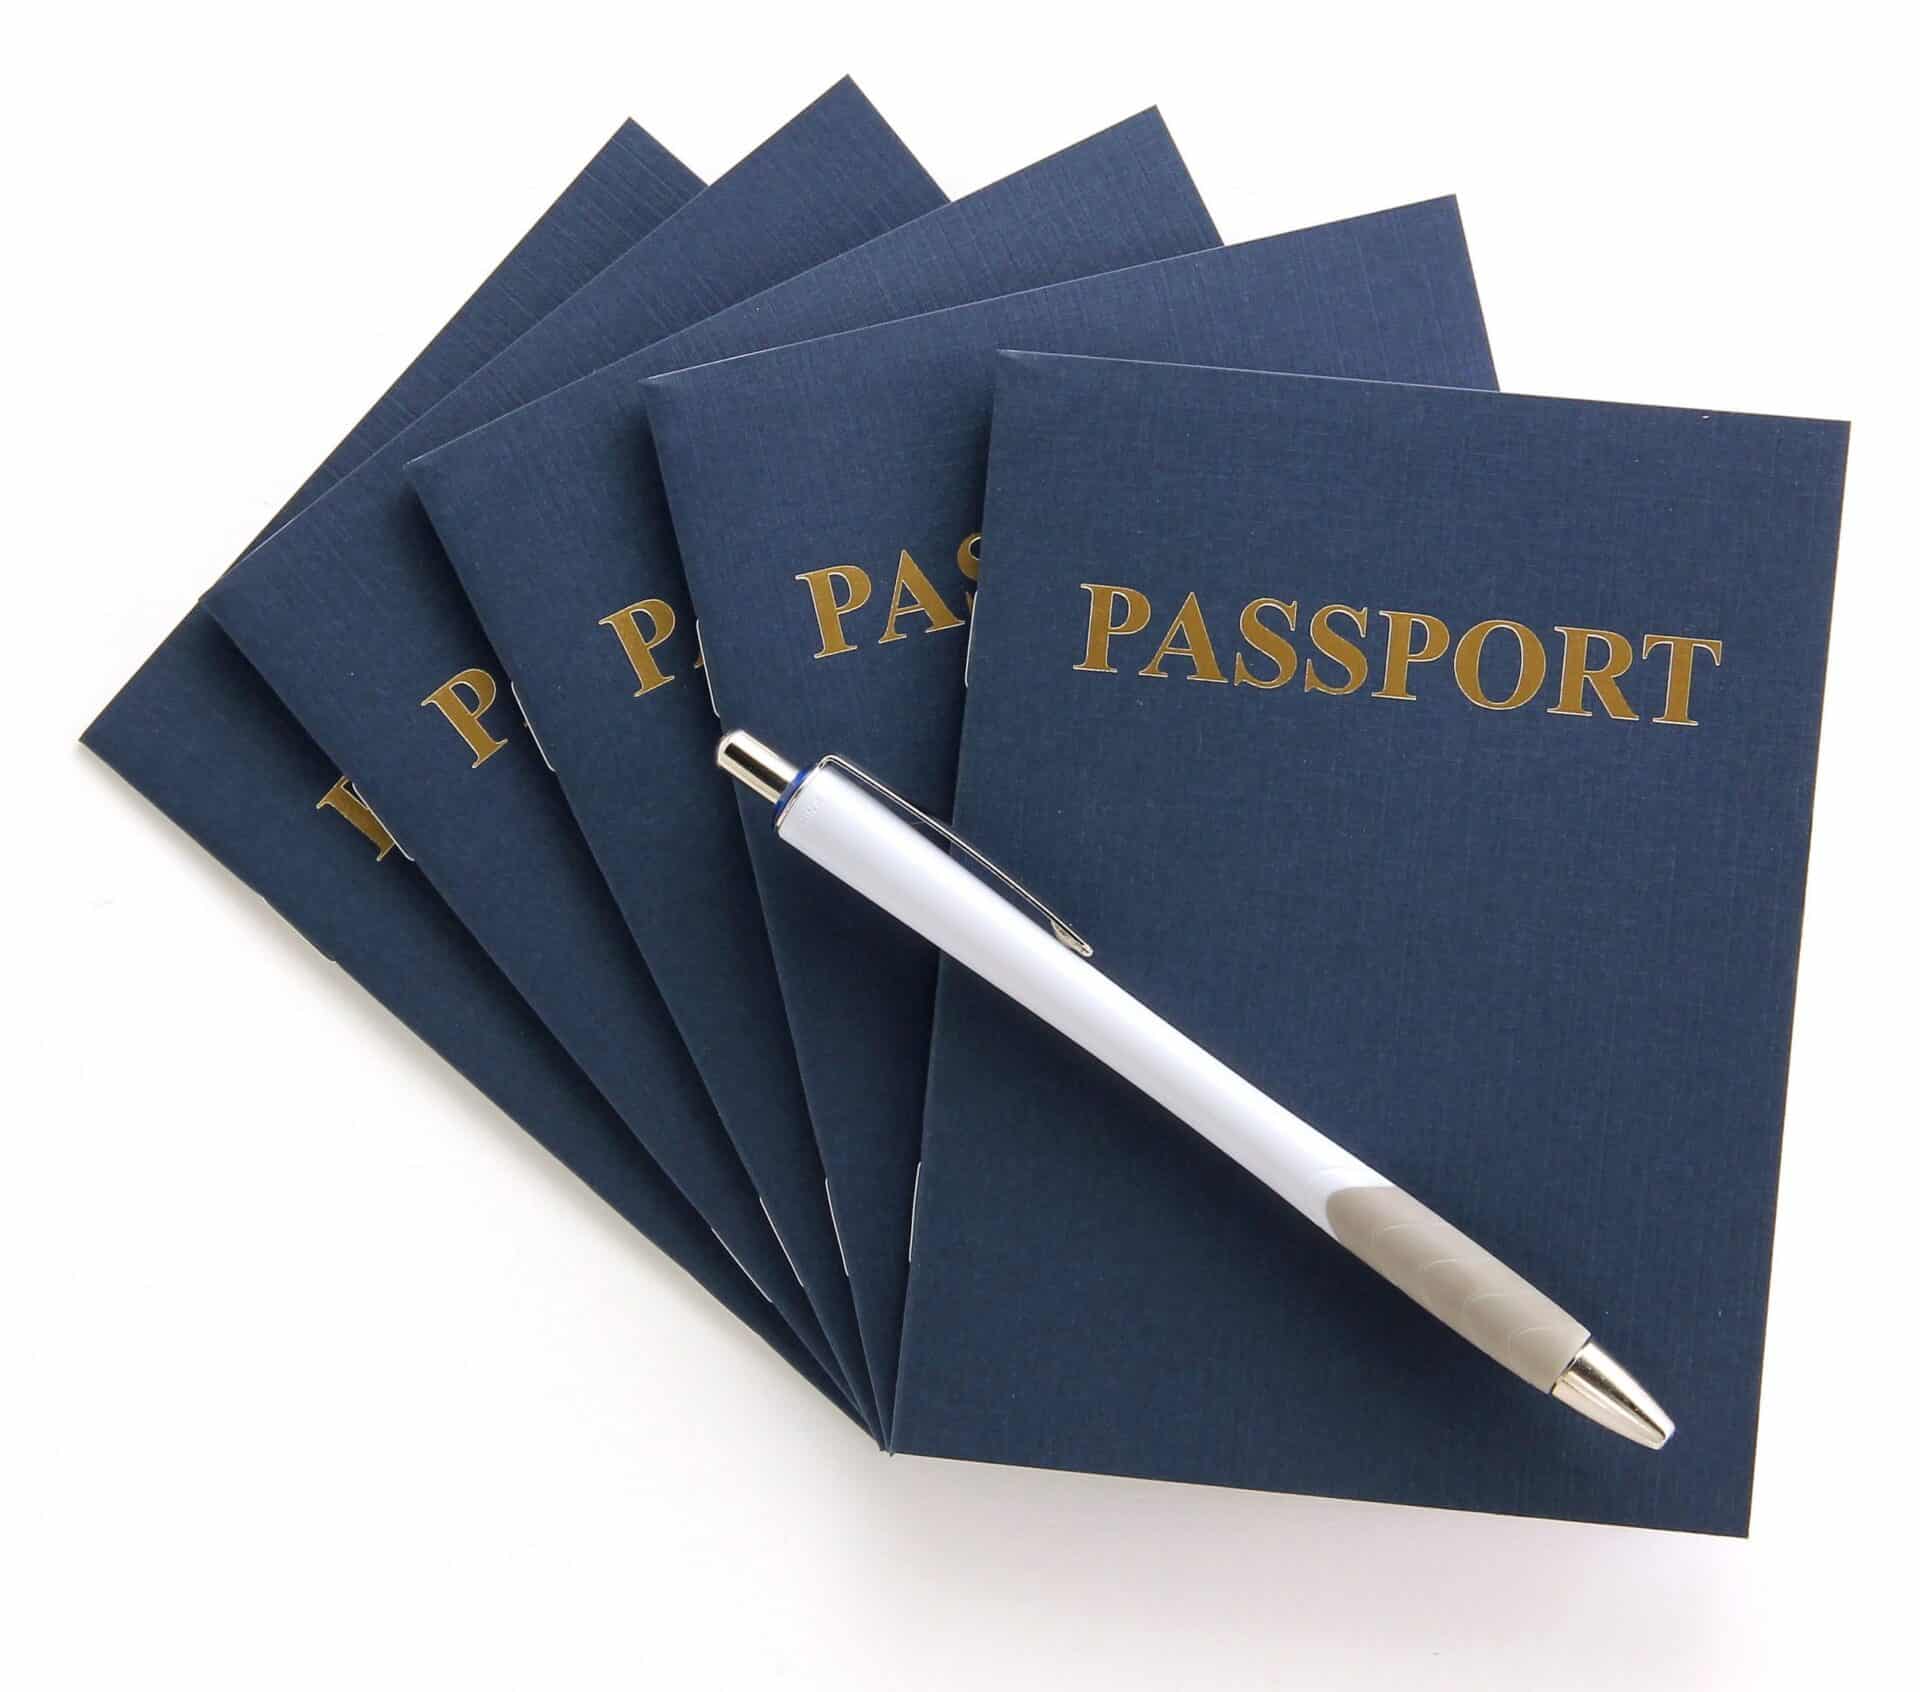 Passport Books (Blank Pages)